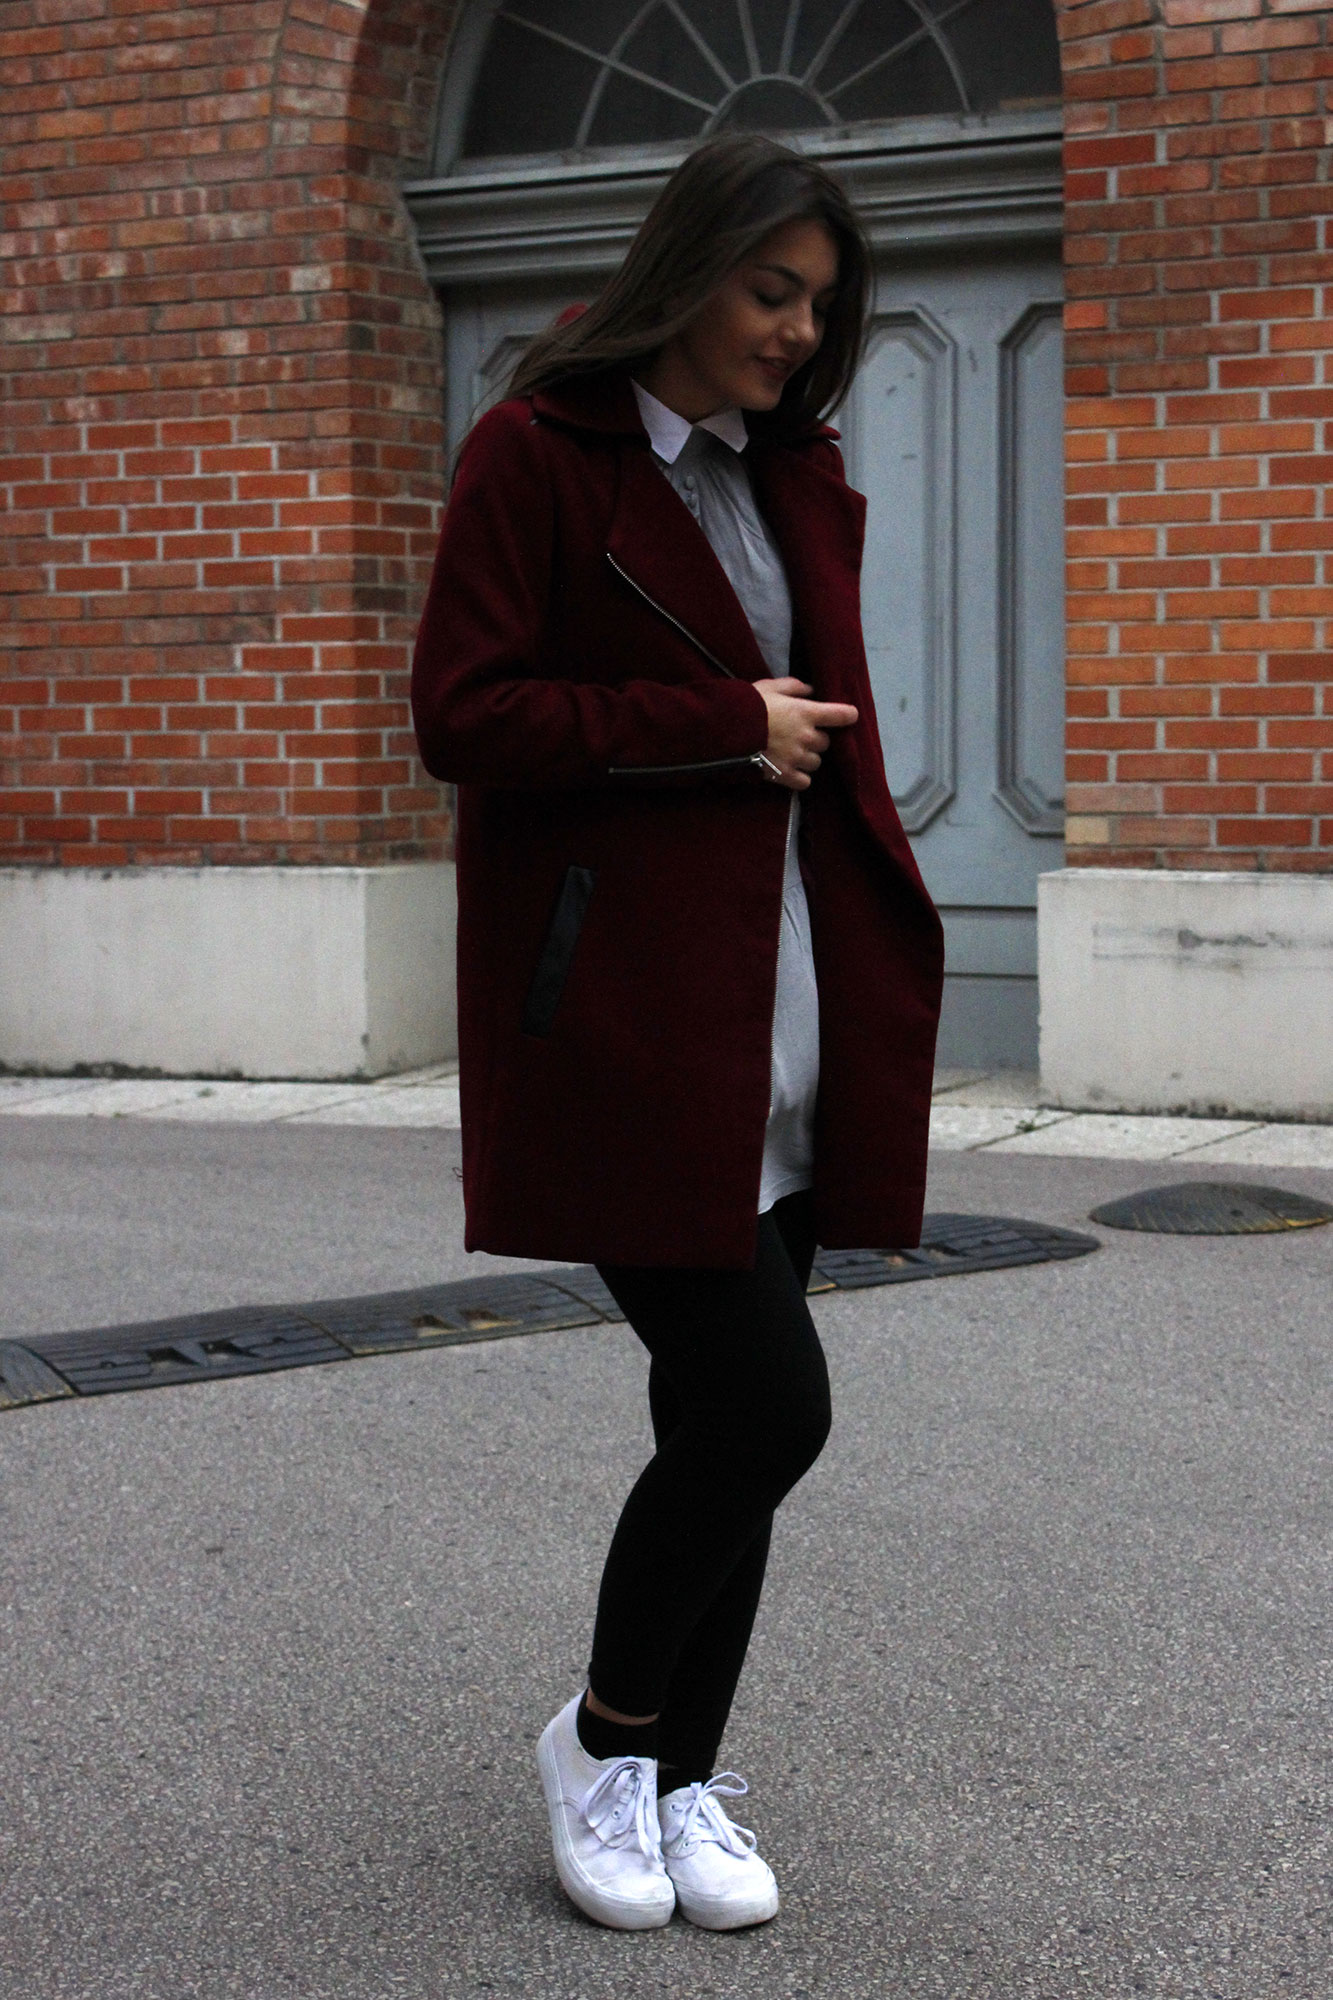 Dorie wearing a red coat and black legging and white shoes